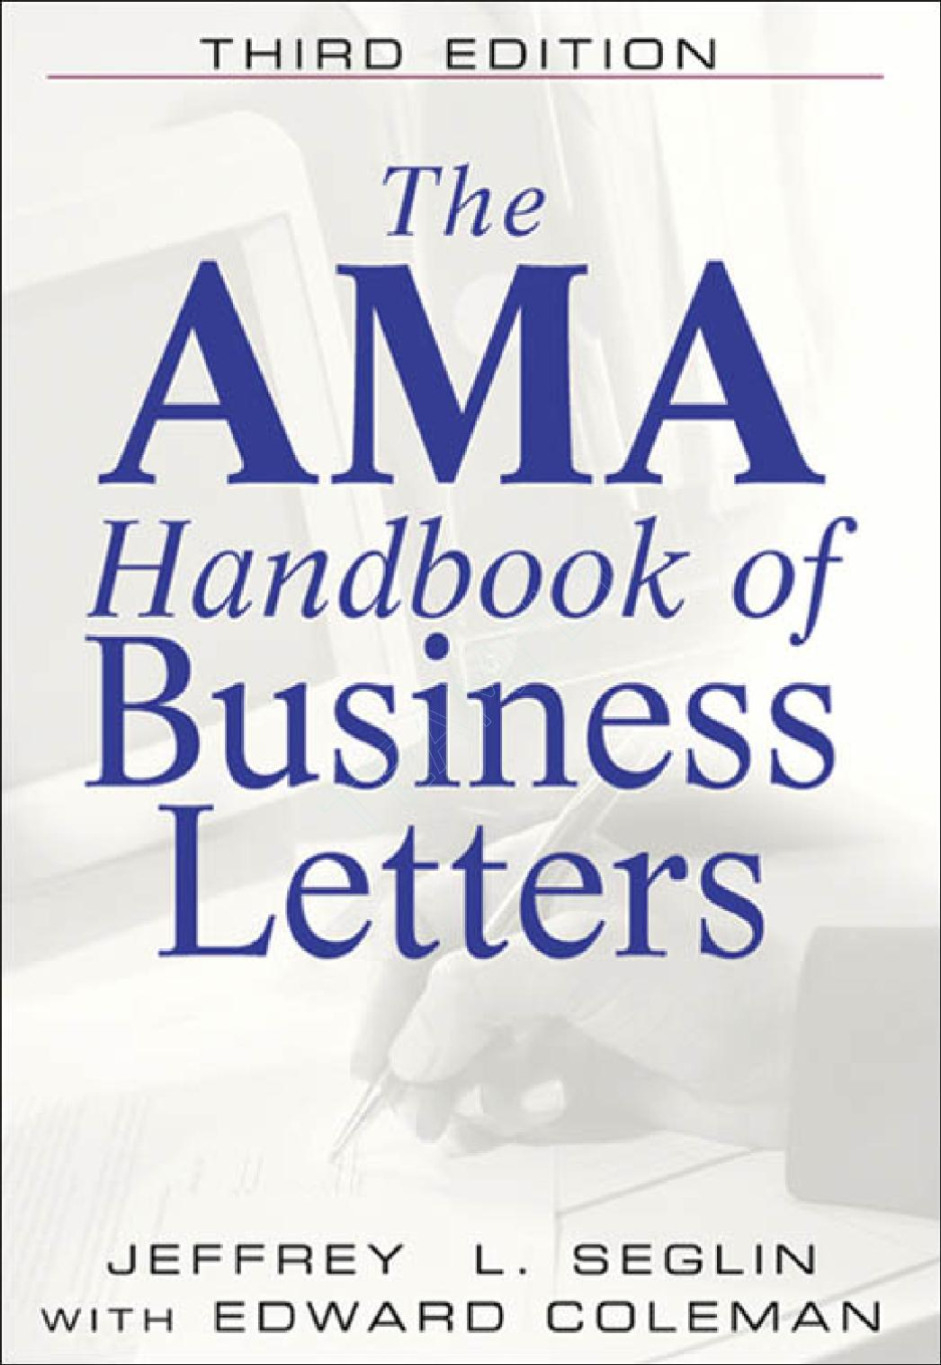 Business Letters by Ahmed Imthias - Issuu